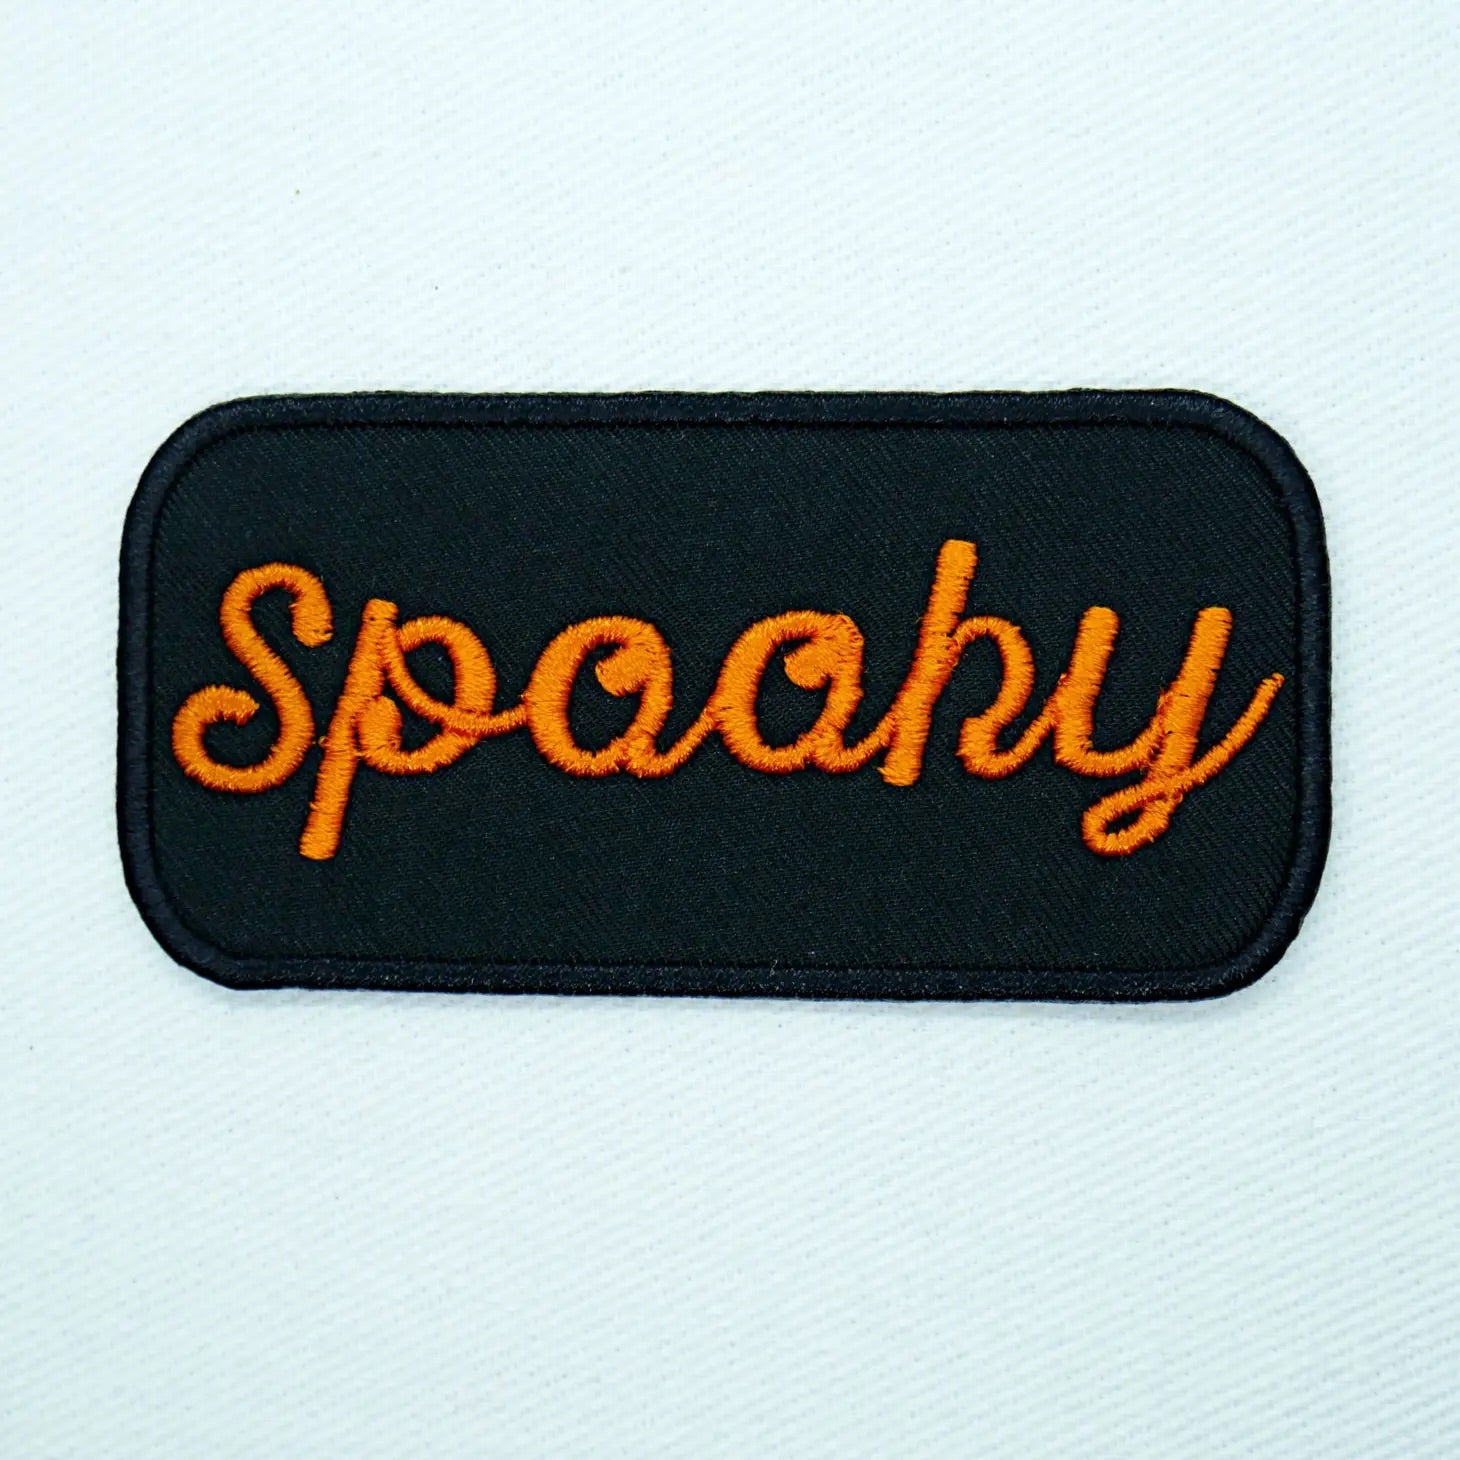 Black & orange "Spooky” cursive name tag style embroidered patch. Black background with orange fint